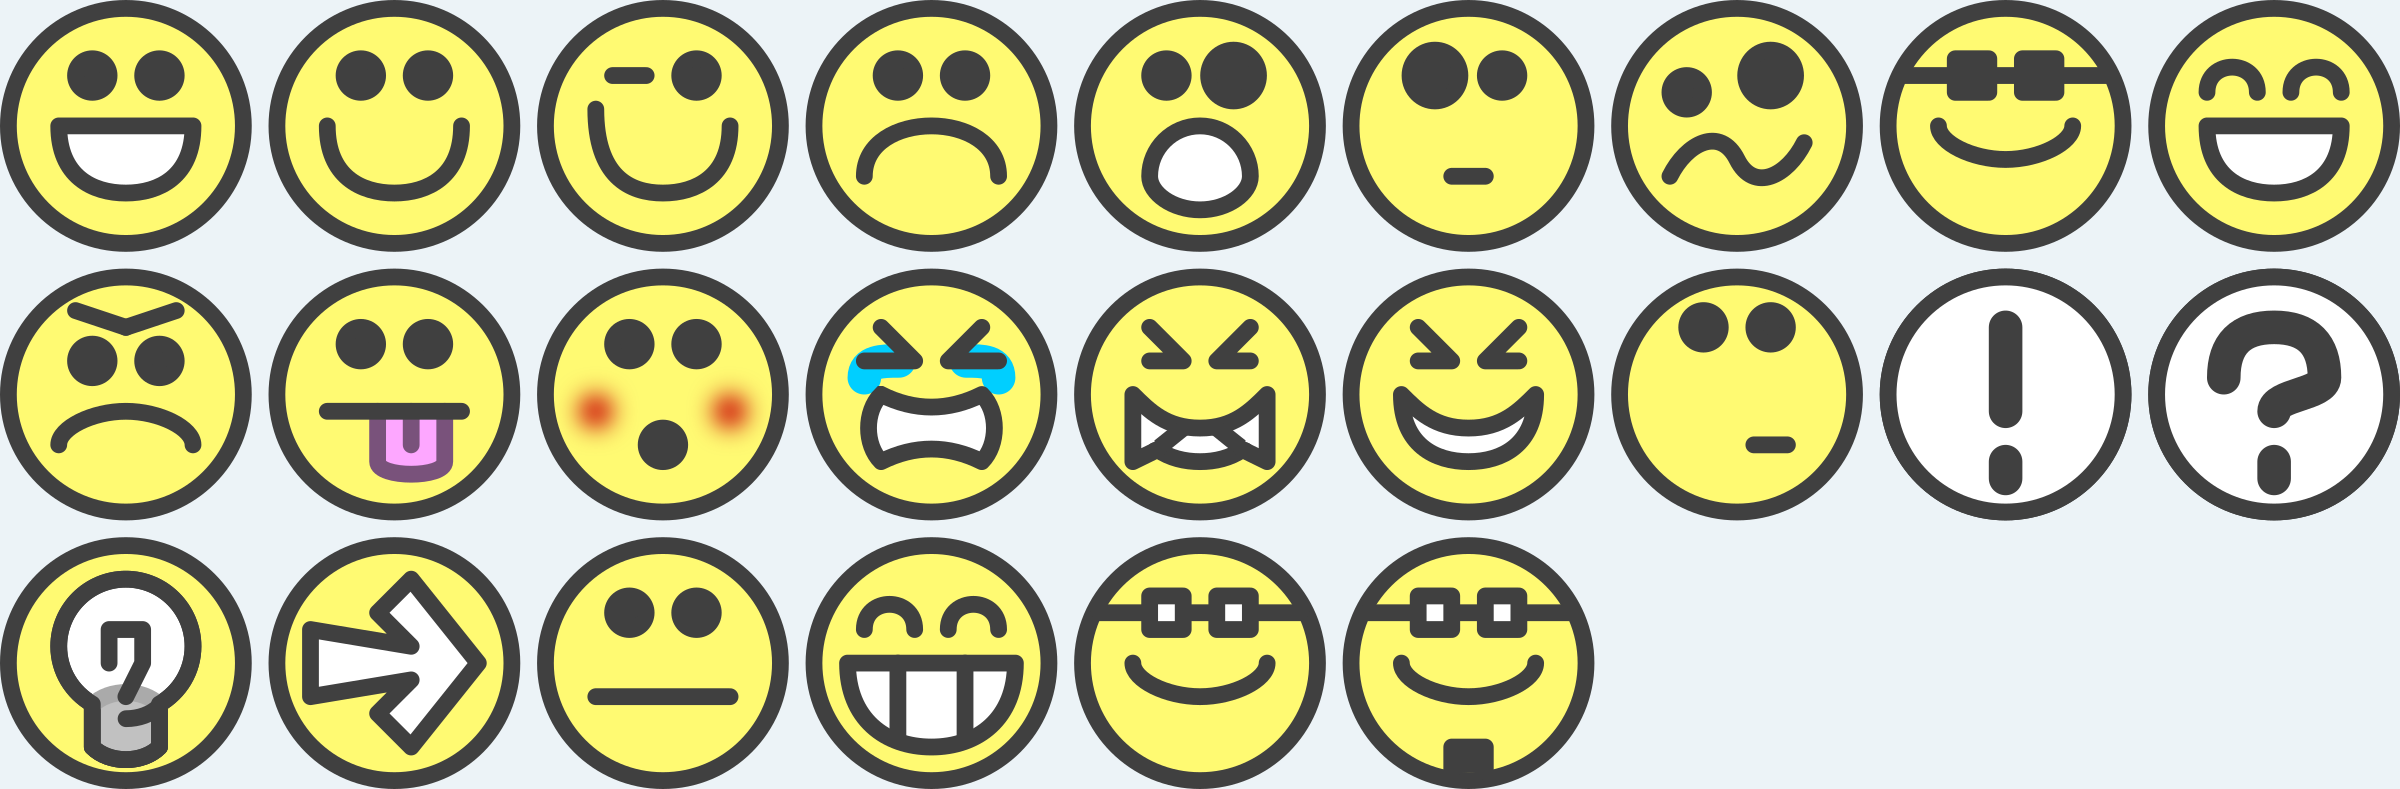 24 Flat Grin Smilies Emotion Icons Emoticons For Example For Forums By